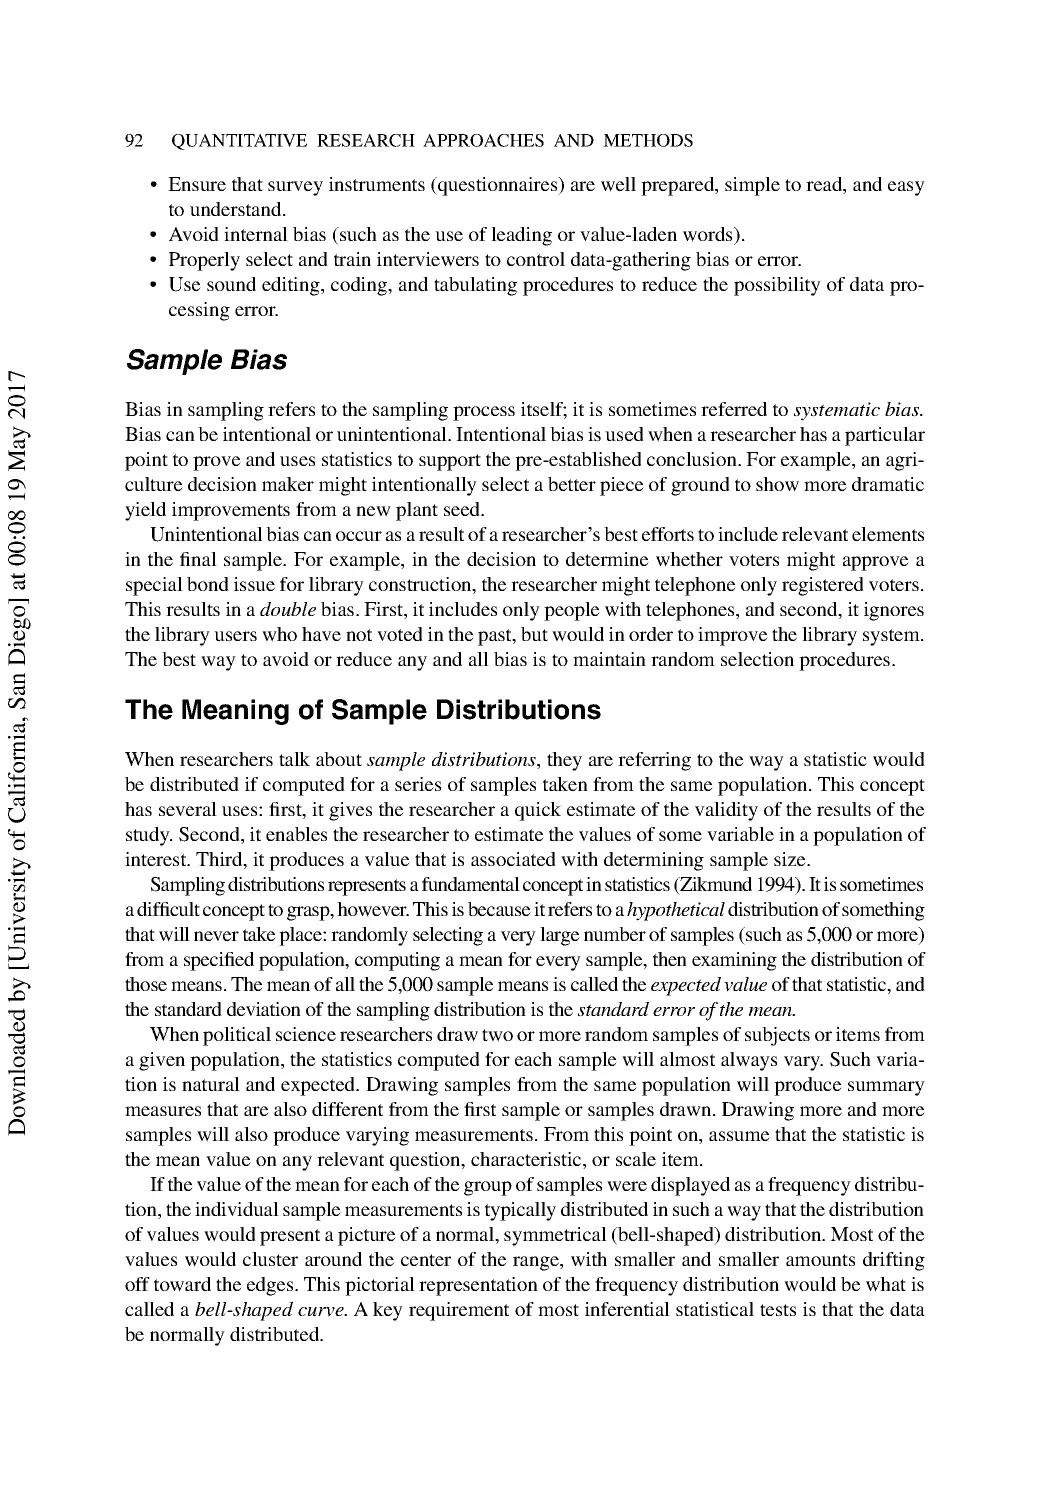 The Meaning of Sample Distributions